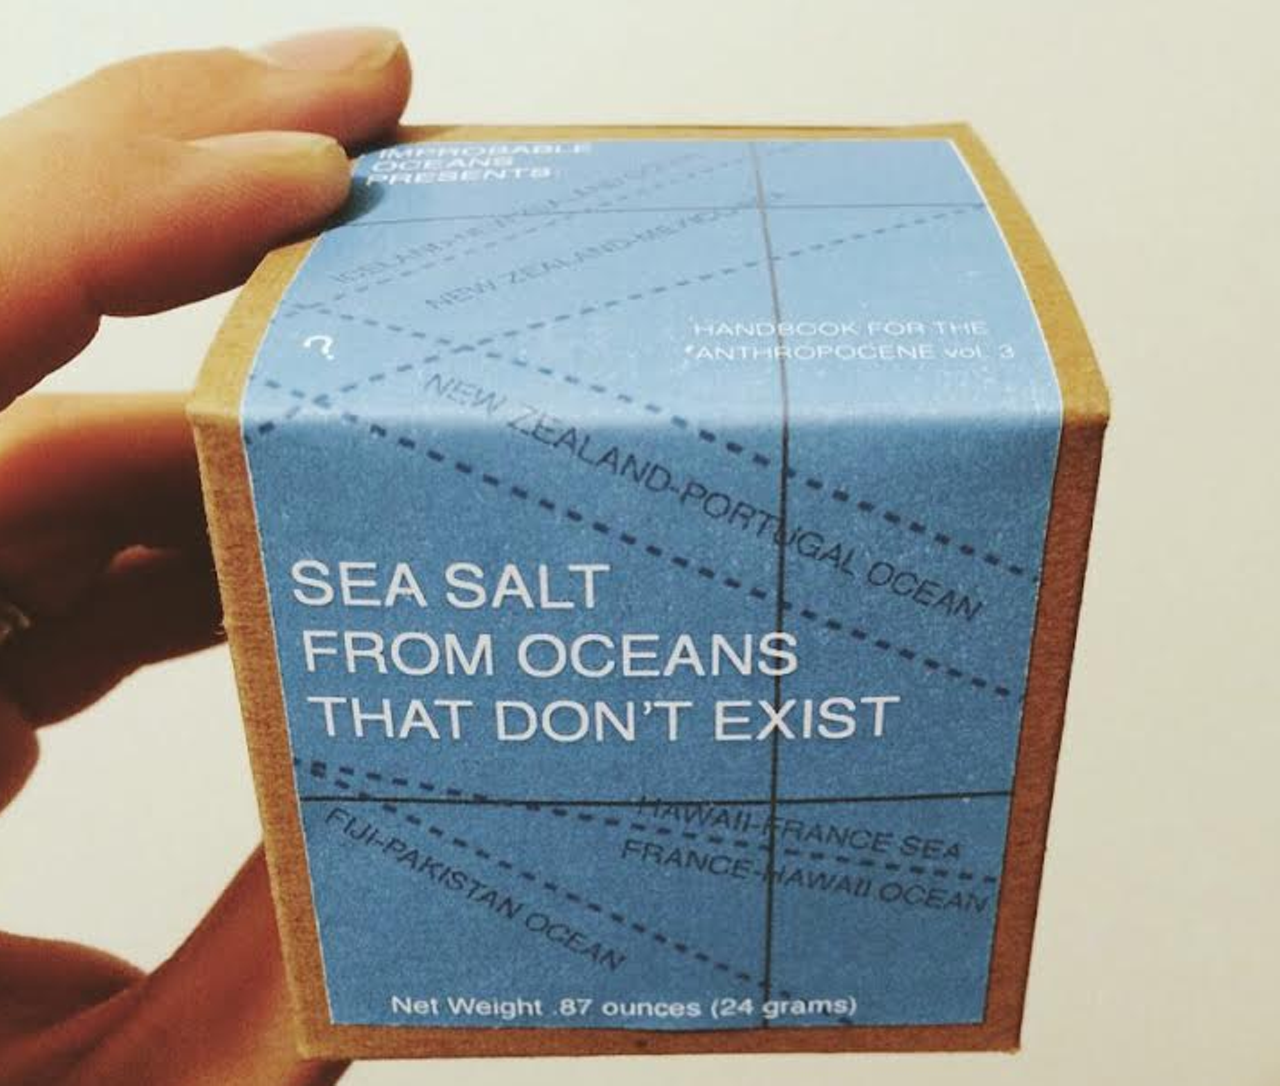 Salt from Oceans that Don&#146;t Exist - $15
Ryan Dewey is a cognitive scientist who concocted &#147;the first true sea salt from oceans that don&#146;t exist.&#148; By mixing sea salt from, say, France with mineral water from, say, Hawaii, and evaporating the brine, Dewey creates a salt that captures the taste of two places that would never come together in the real world. His experimental salts are the most expensive in the world at roughly $100 for two drams. Don&#146;t worry, he also sells a more approachable blend of Pacific Ocean salt blended with ripe organic juniper berries, which he describes as &#147;a cross between a crisp gin & tonic and a fresh springtime forest.&#148; Use it on french fries, roasted poultry, popcorn or to rim a glass for gin-based cocktails. rozis.com 14900 Detroit Ave., Lakewood  216-221-1119